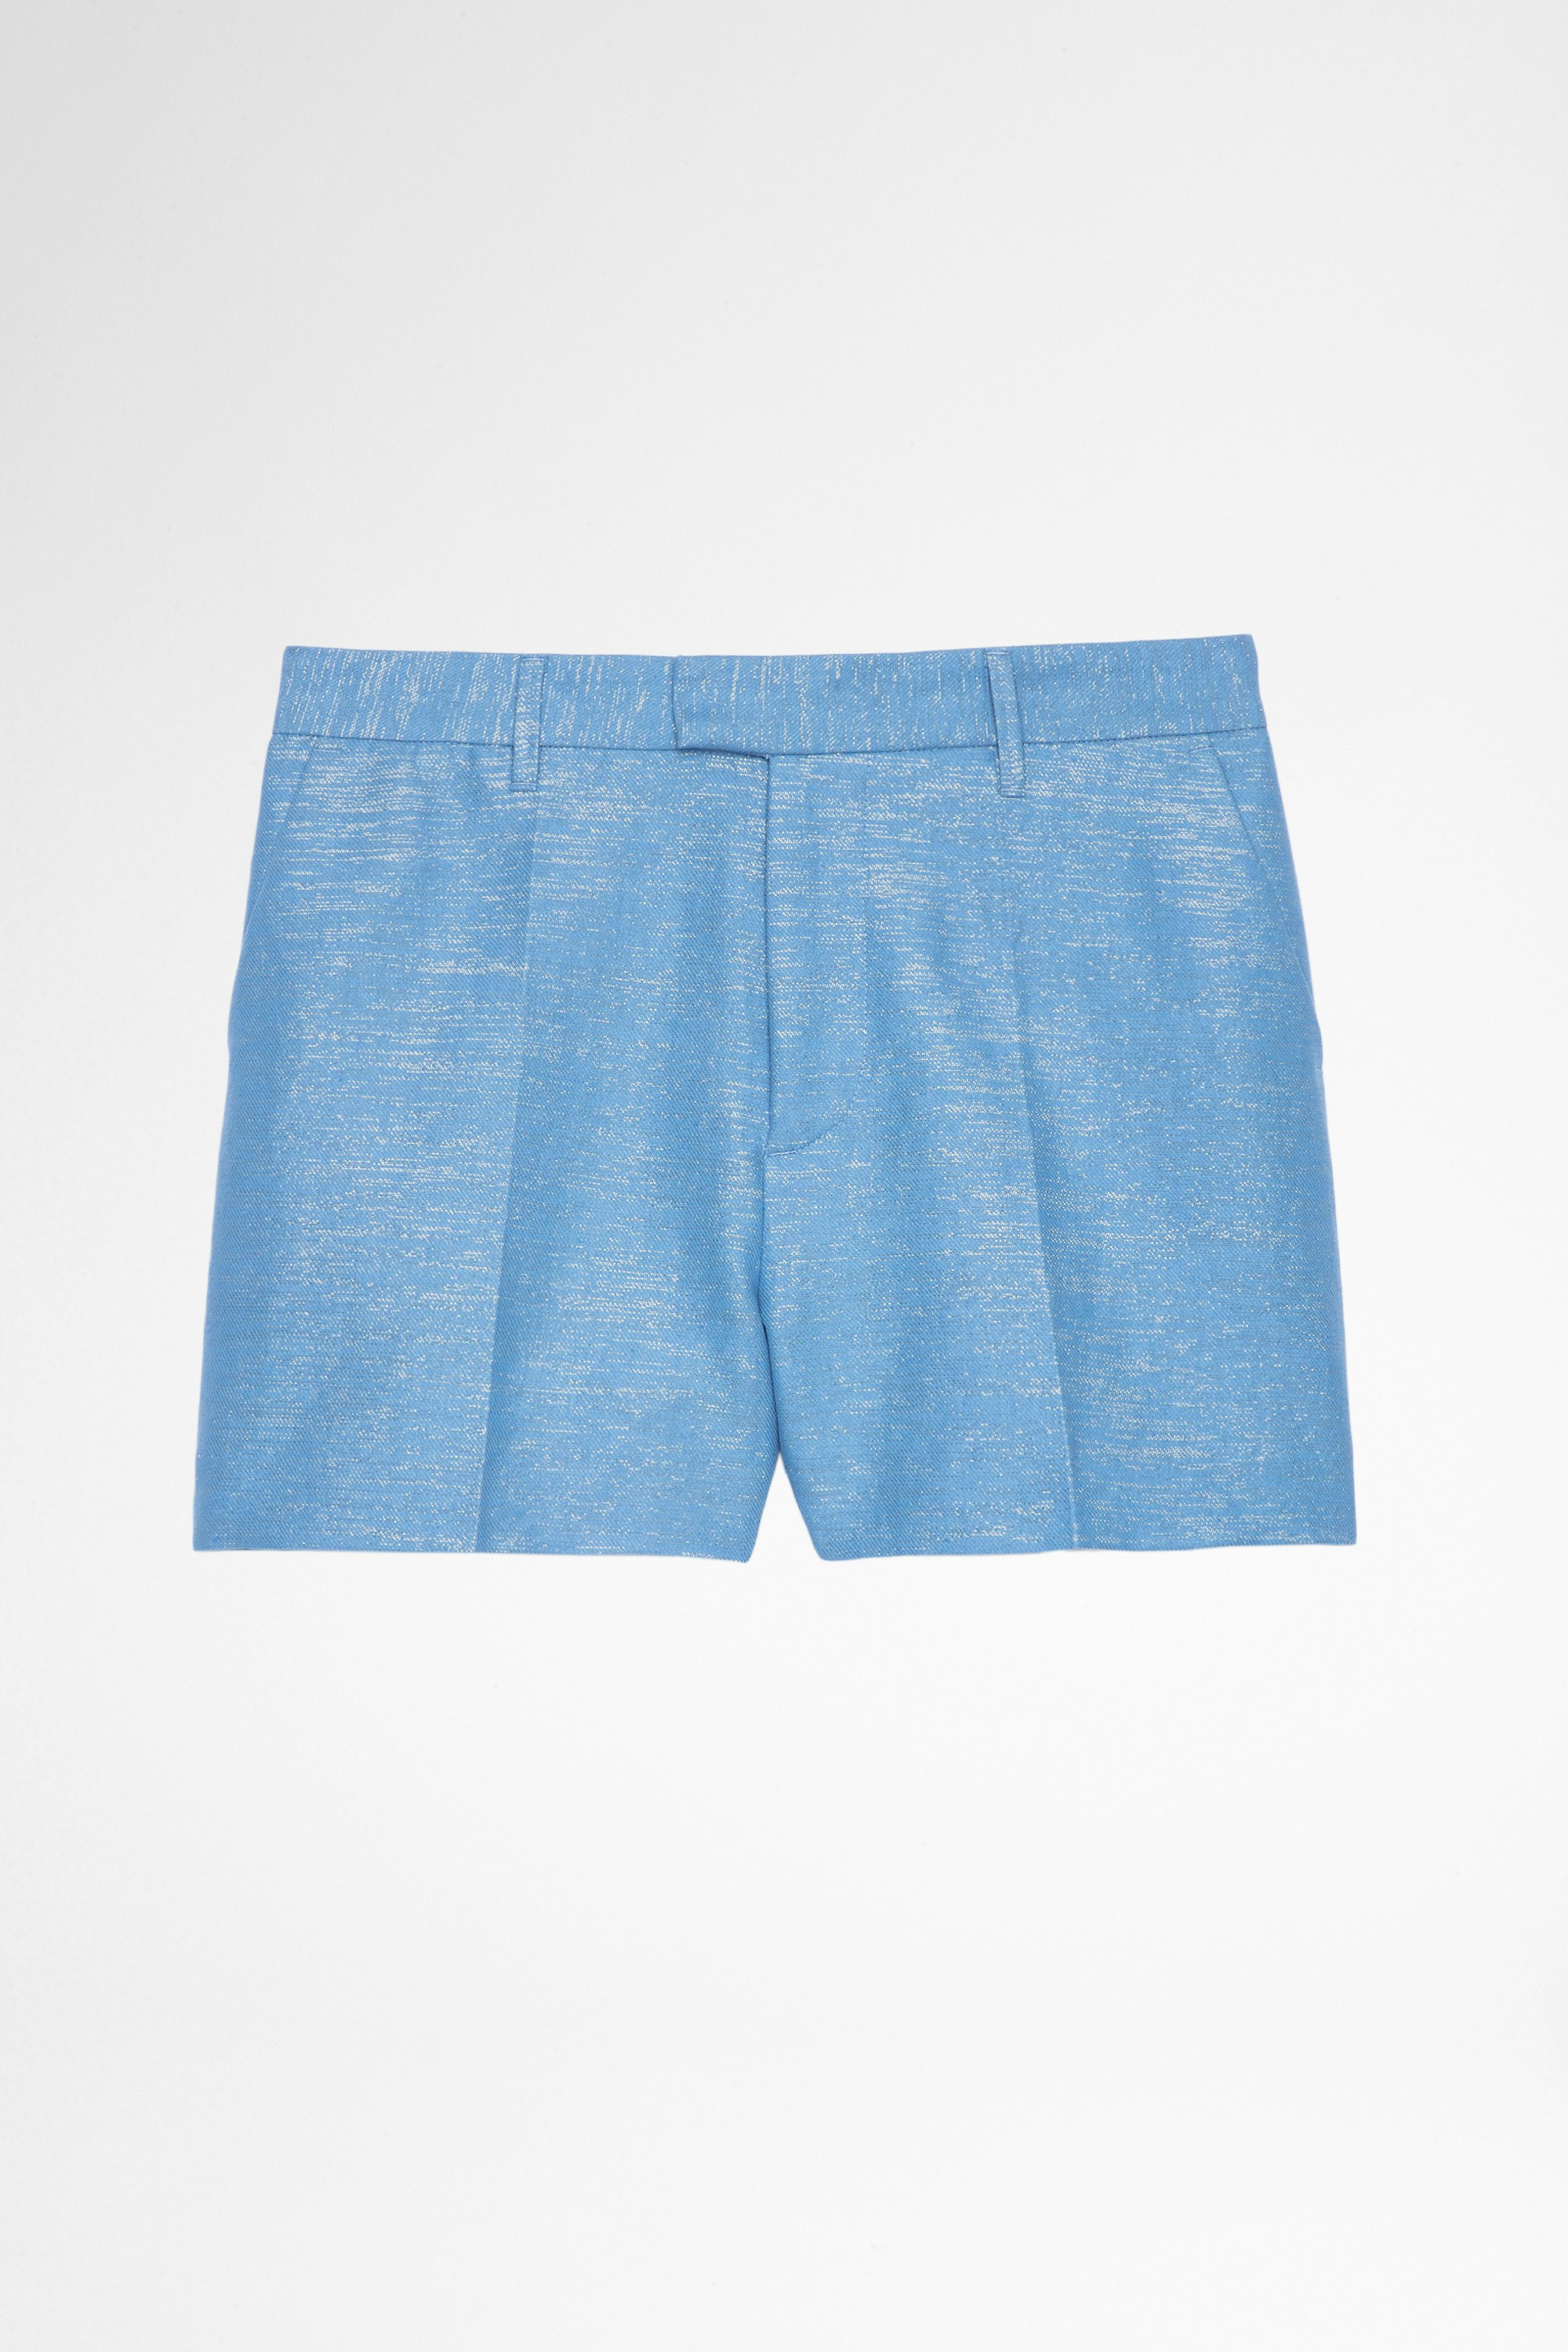 Please ショーツ Women's linen and cotton shorts in sparkly sky-blue